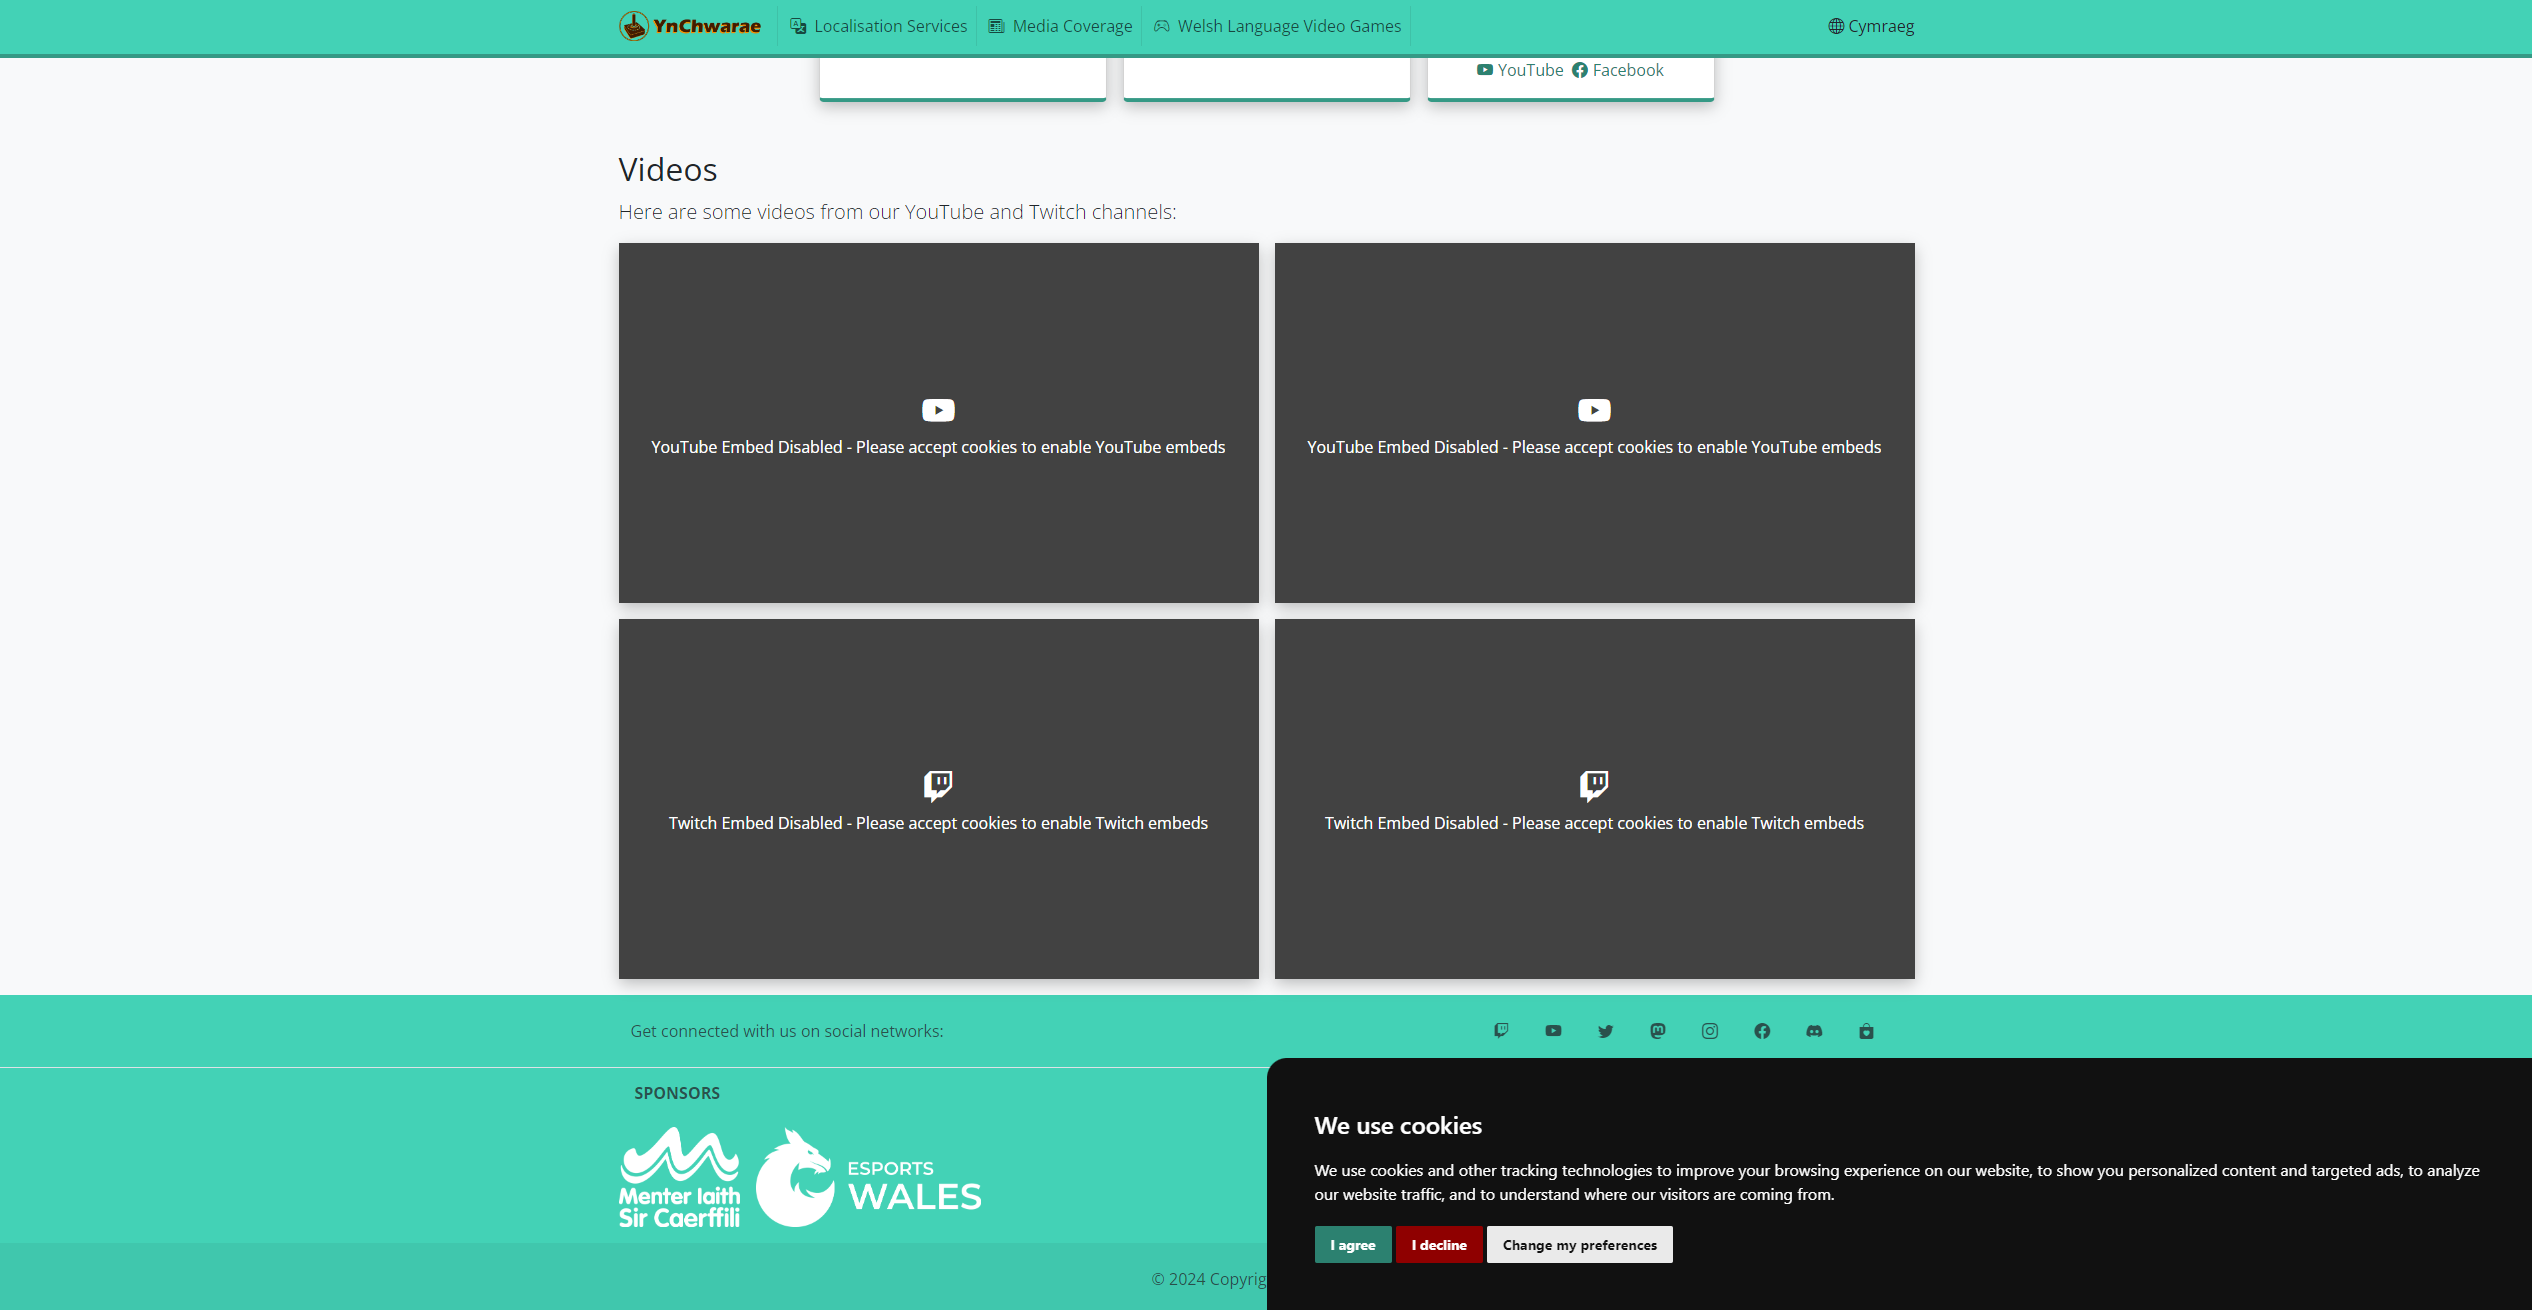 A screenshot of the ynchwarae.cymru homepage, showing the placeholders for the Twitch and YouTube embeds